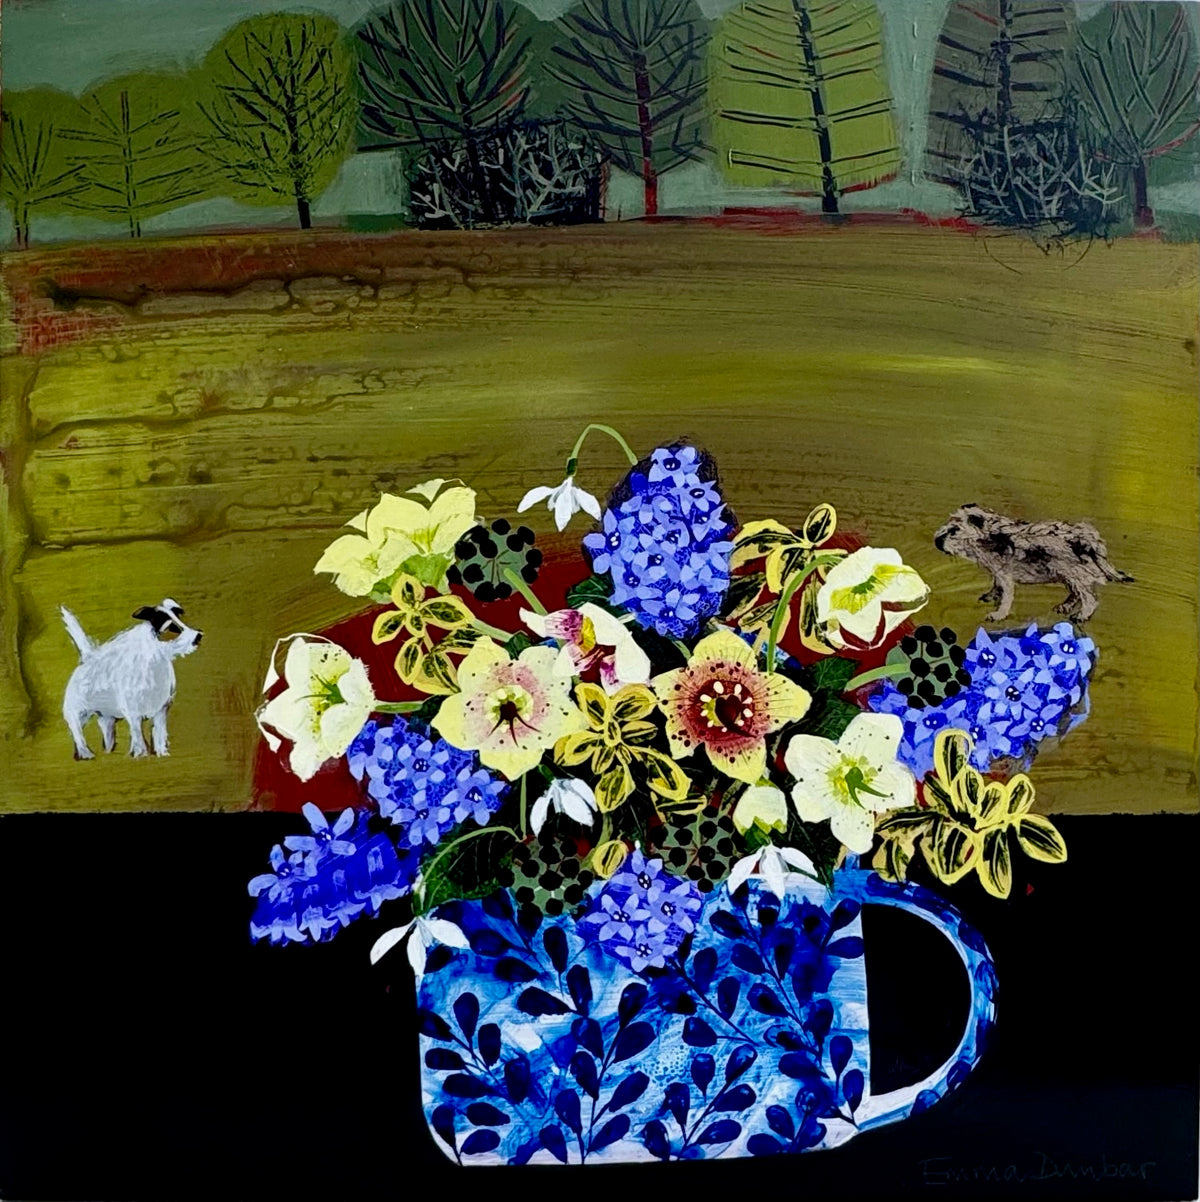 &#39;Two Friends behind hellebores and hyacinths&#39; by Emma Dunbar available at Padstow Gallery, Cornwall